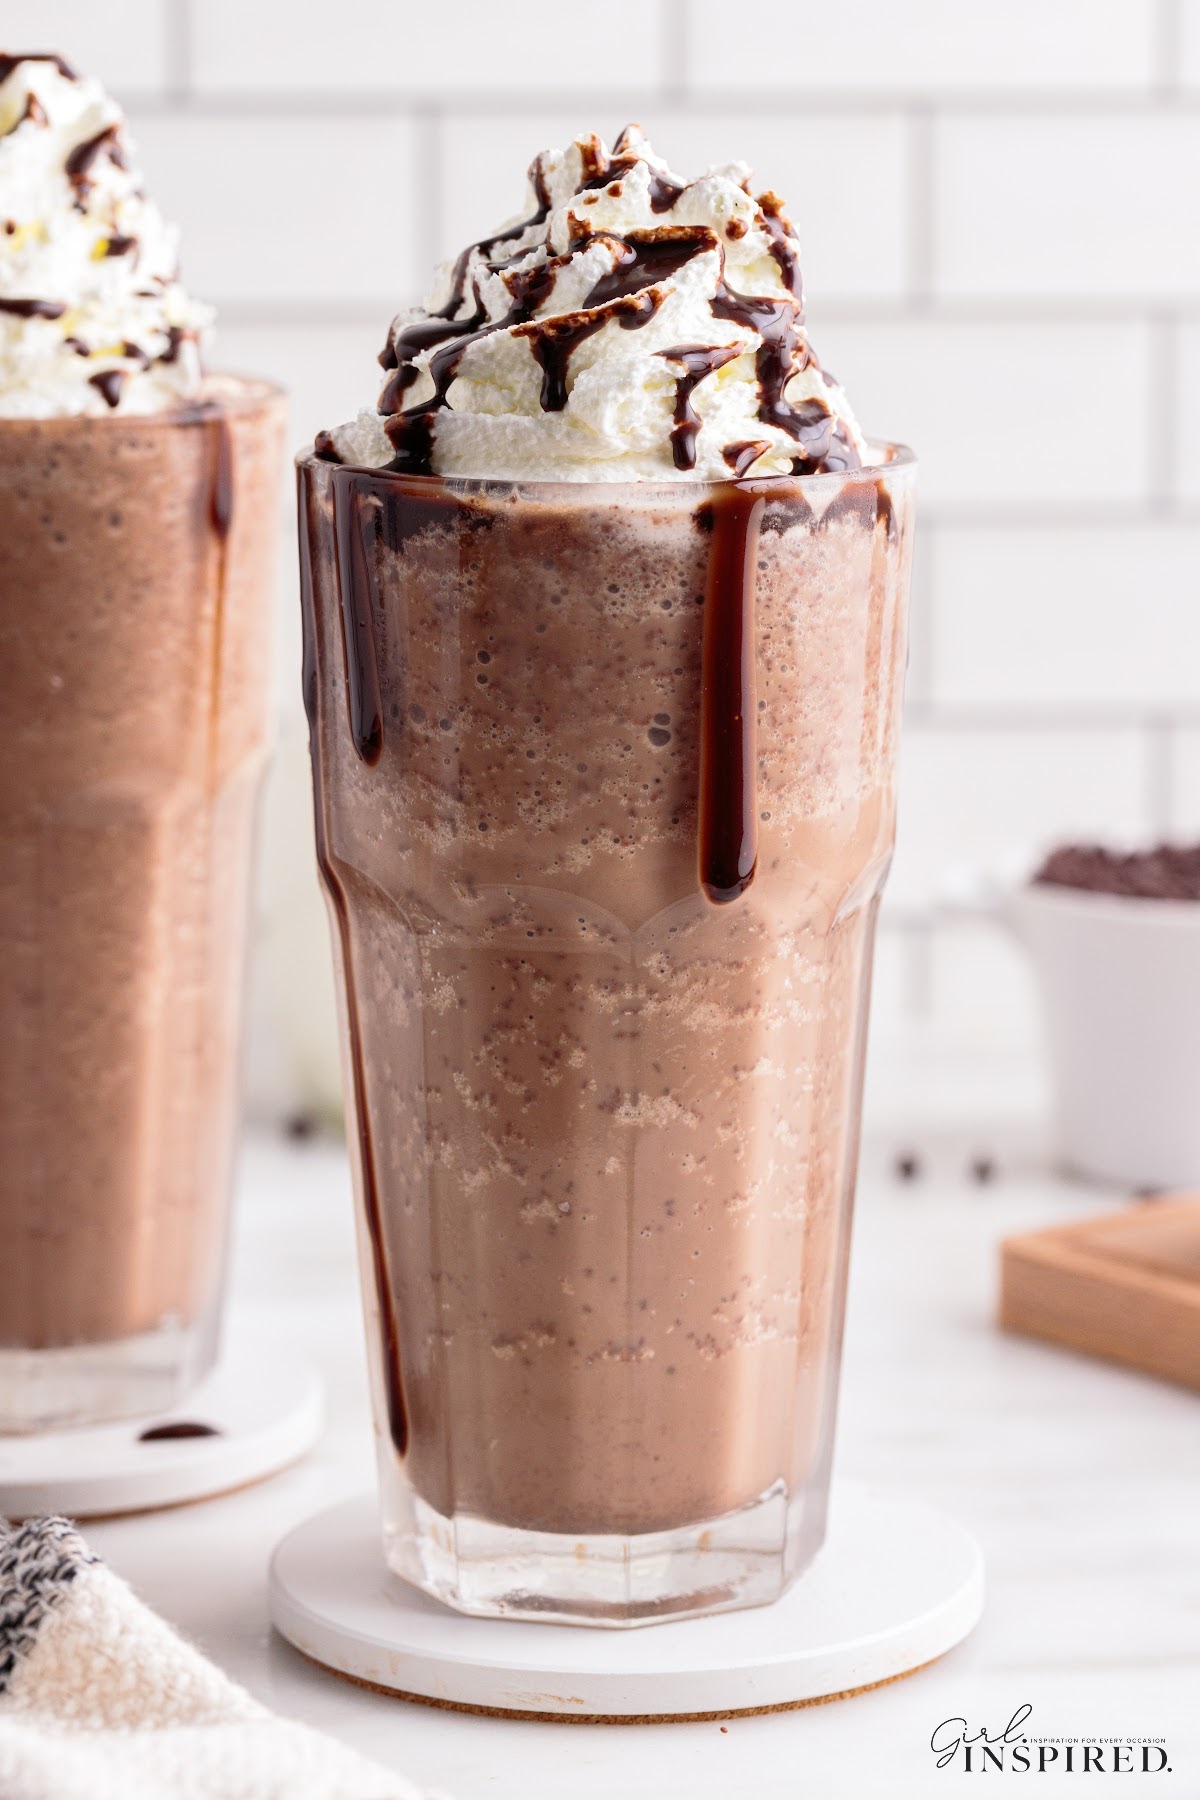 Double chocolate chip frappuccino in a glass with whipped cream and chocolate drizzle.